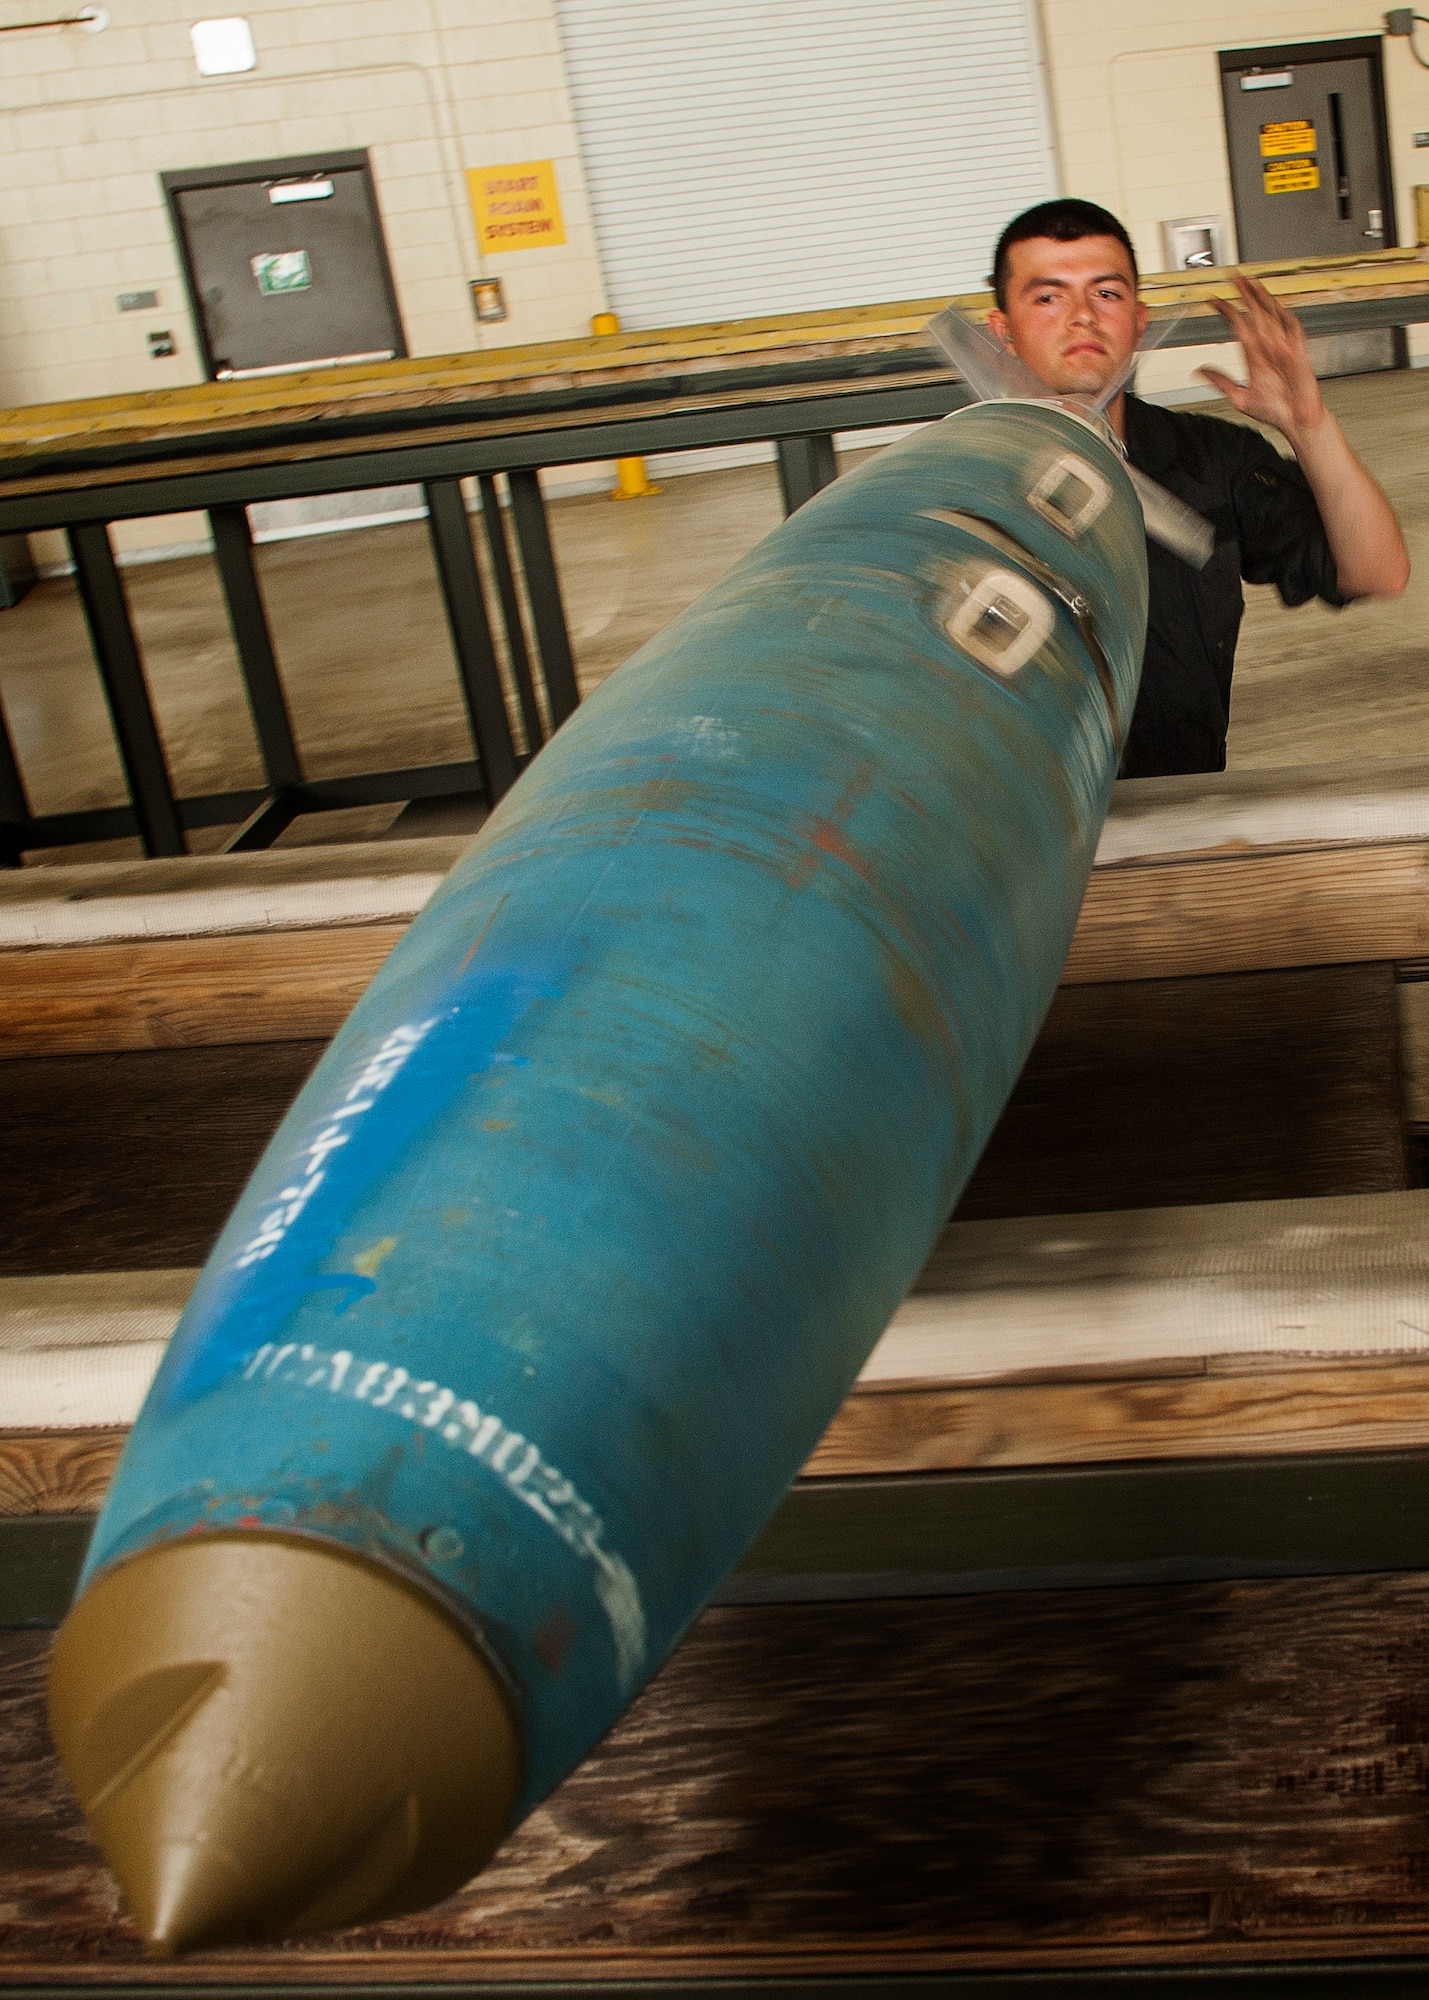 Senior Airman Brian Sanchez, 5th Aircraft Maintenance Squadron weapons load crew member, rolls an inert GBU-38 munition at Minot Air Force Base, N.D., June 19, 2017. The training muntions were loaded into an aircraft by the 5th AMXS Global Strike Challenge team during their bomb-loading competition. (U.S. Air Force photo/Senior Airman J.T. Armstrong)